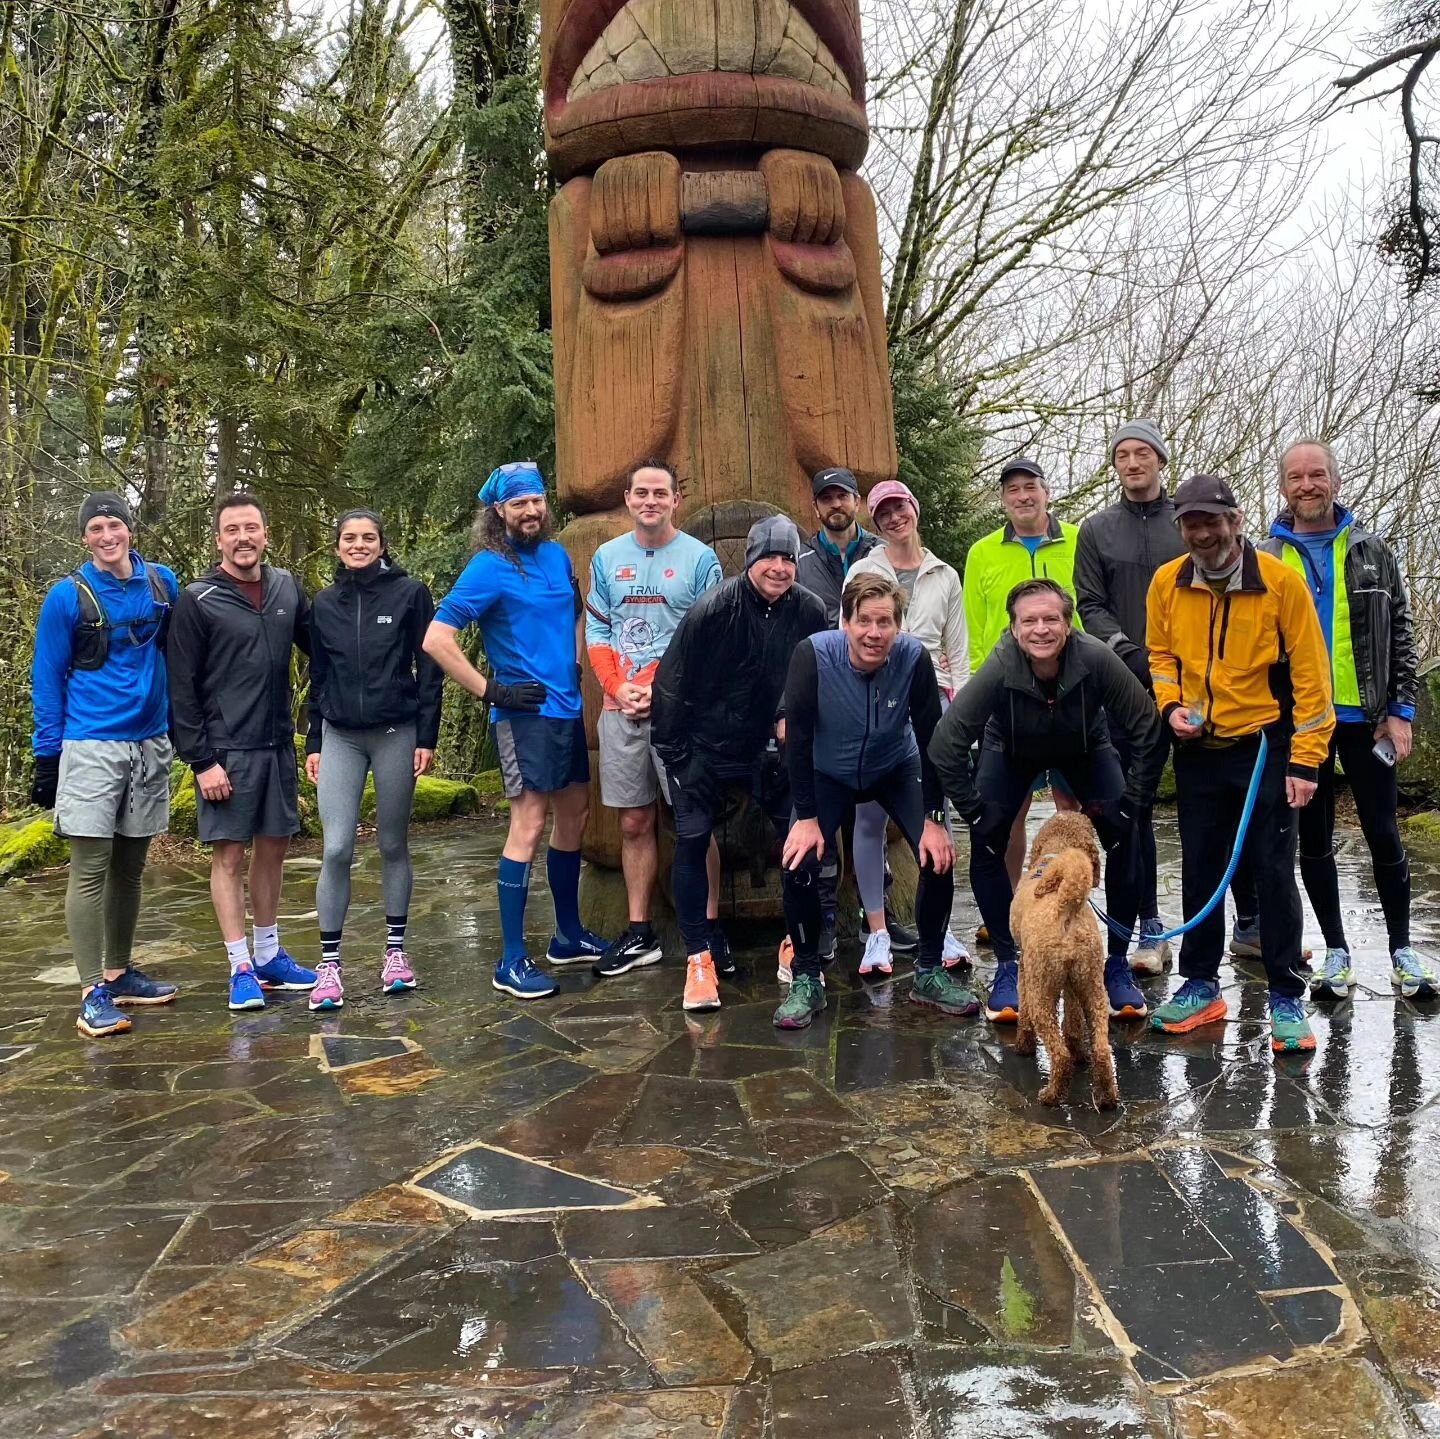 Sunday crew showing up today, braving the rain and cold!! 💪 Nice to see new faces and familiar faces!

Only one more Sunday training run before @shamrockpdx. Will you be there? ☘️ 

#noporunclubpdx #terwilligerrun #sundayrunday #shamrockpdx